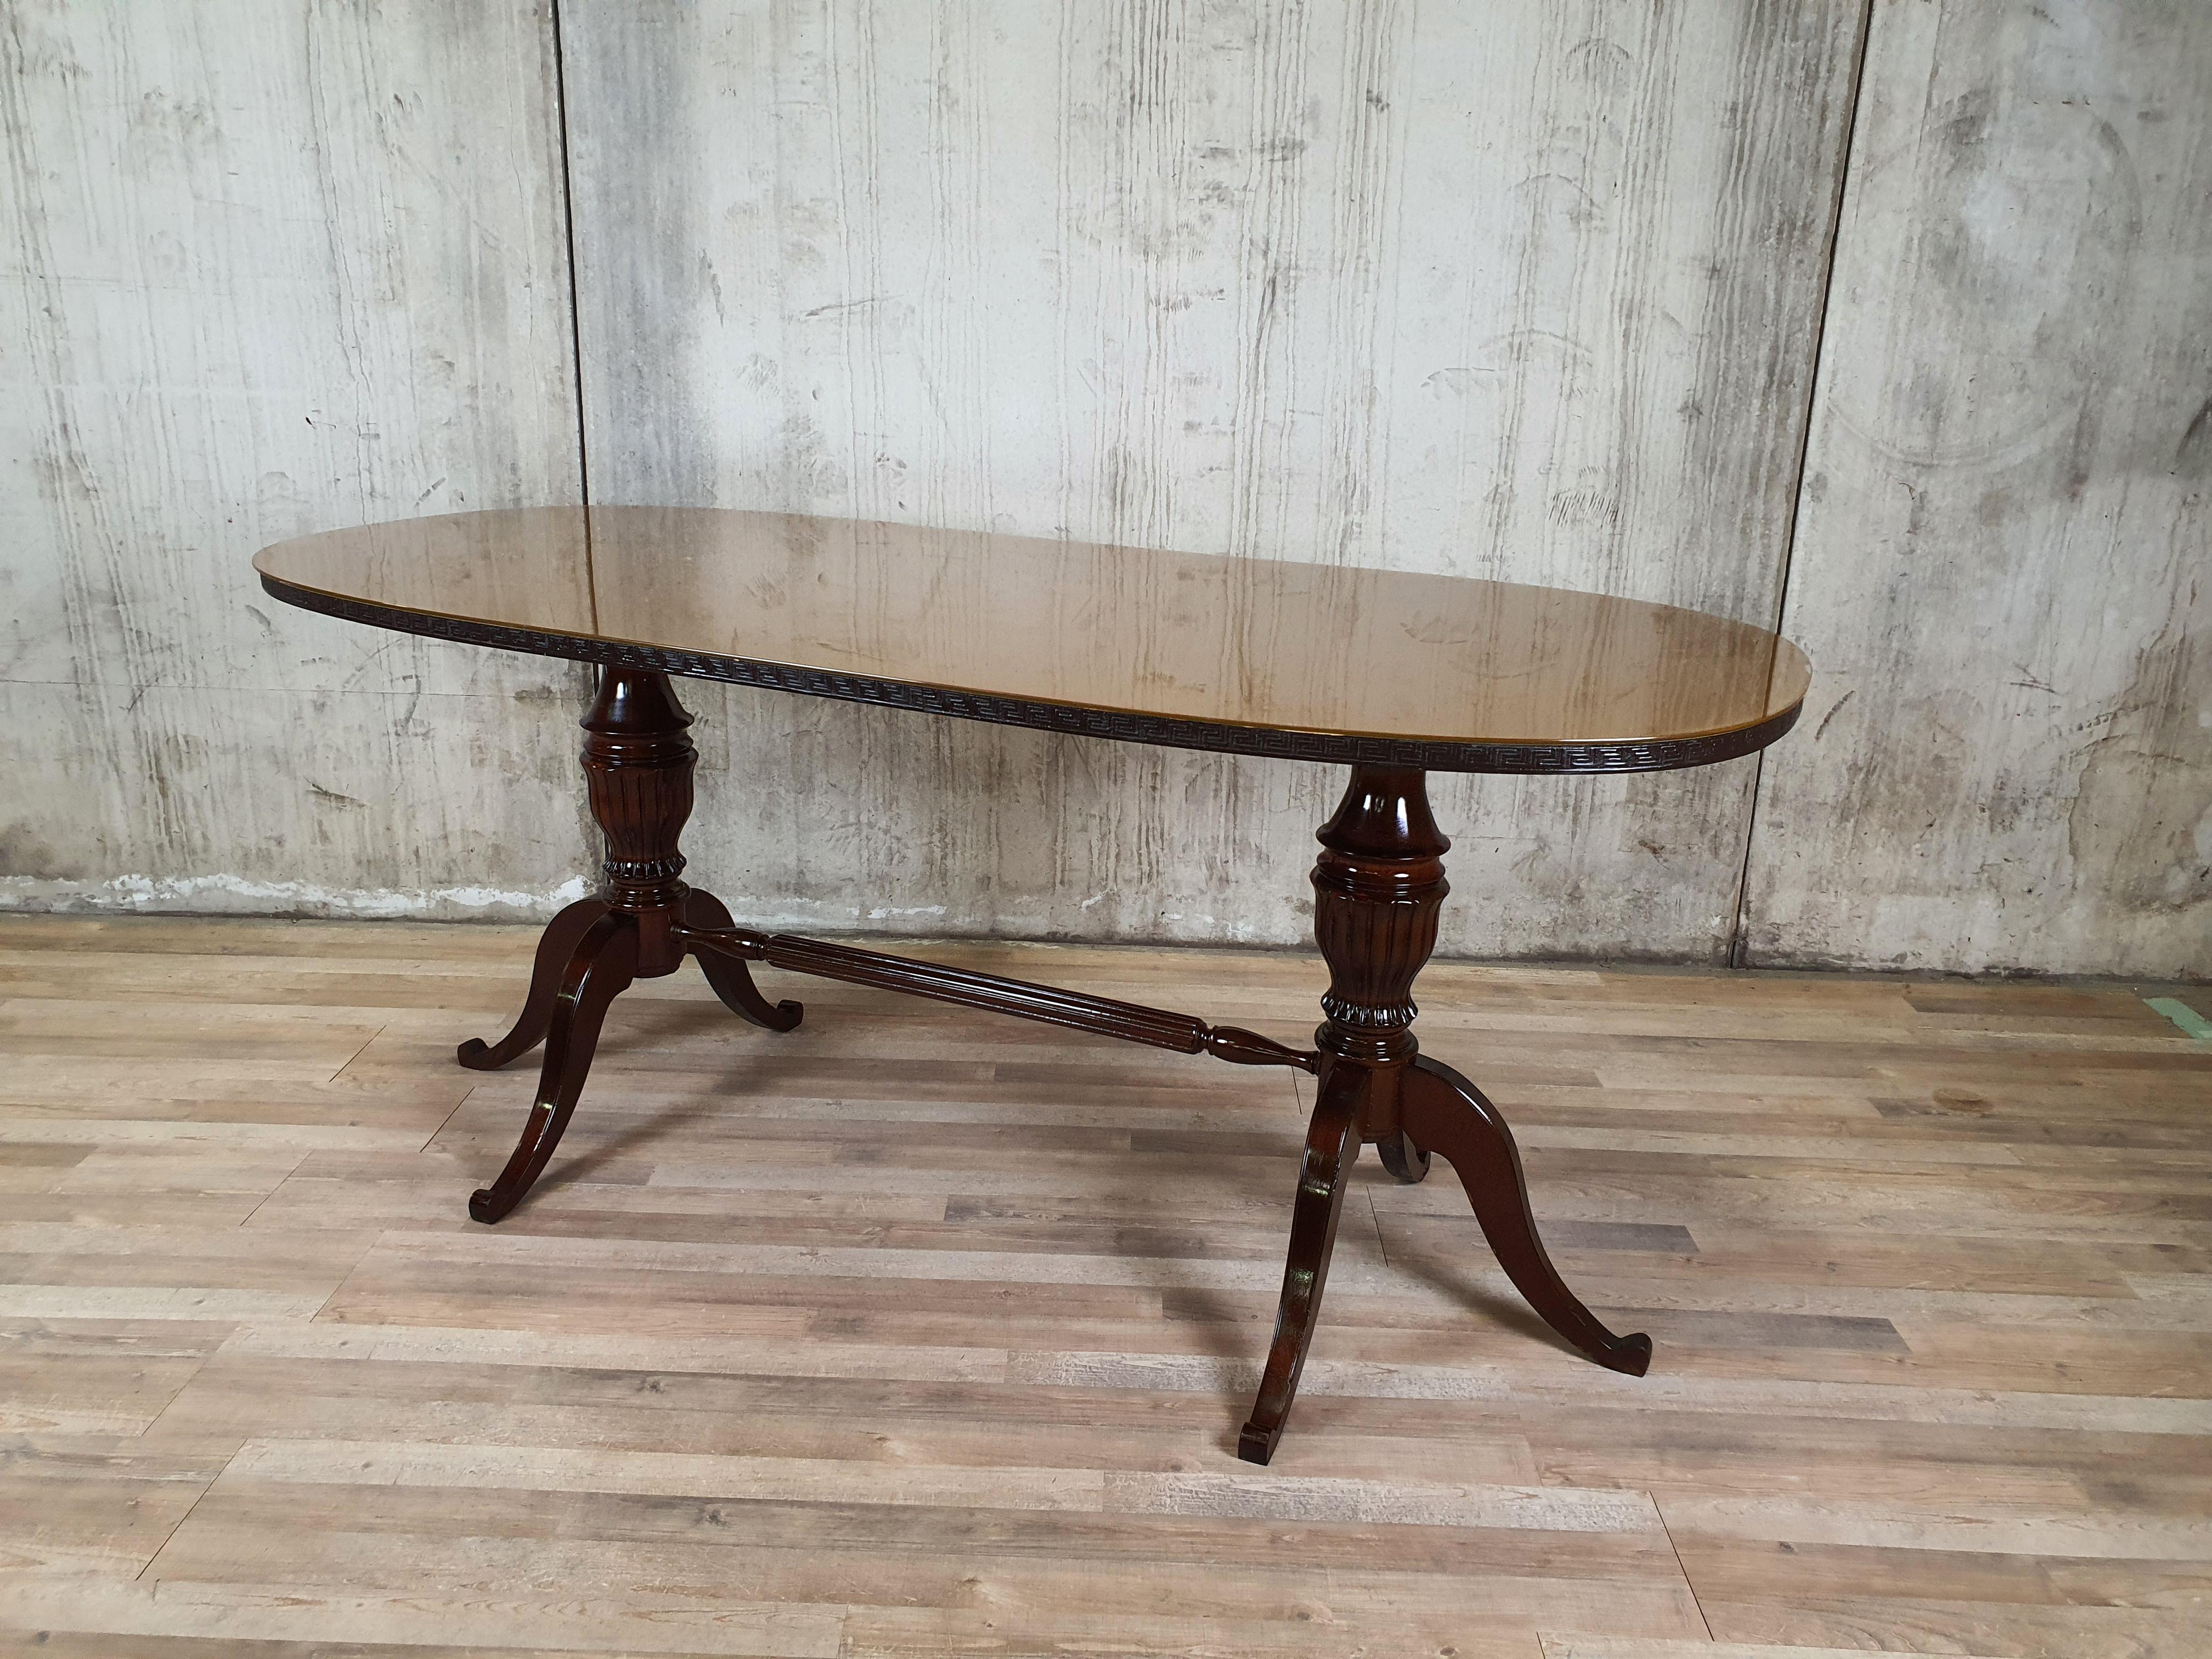 Elegant 1950s table with finishes along the edge and original glass top of the time.

The structure at the base of the table is very particular, entirely in worked and carved wood. It lends itself perfectly to modern or antique furnishings,